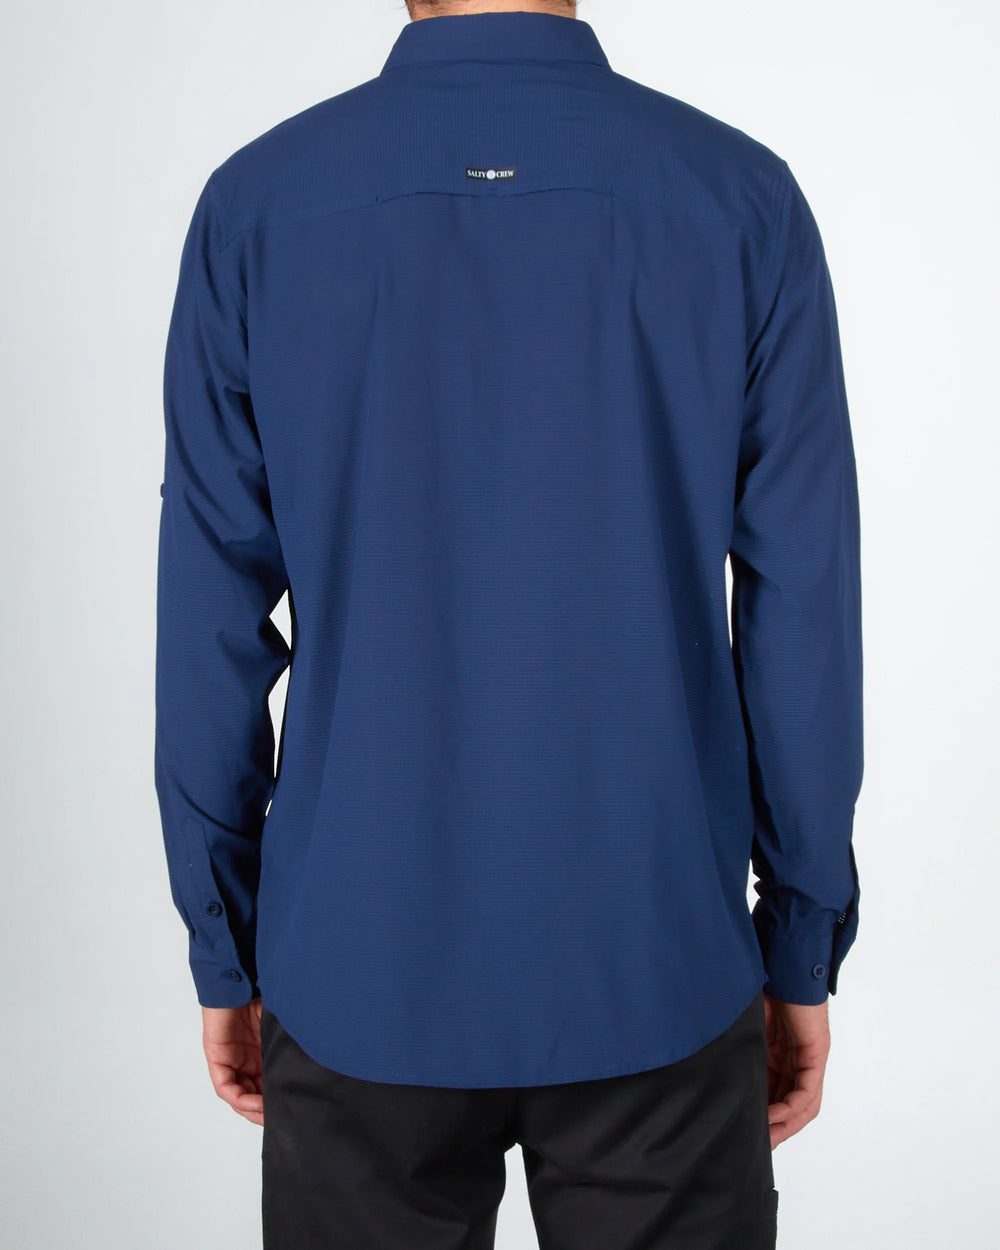 Windward Perforated L/S Tech Woven